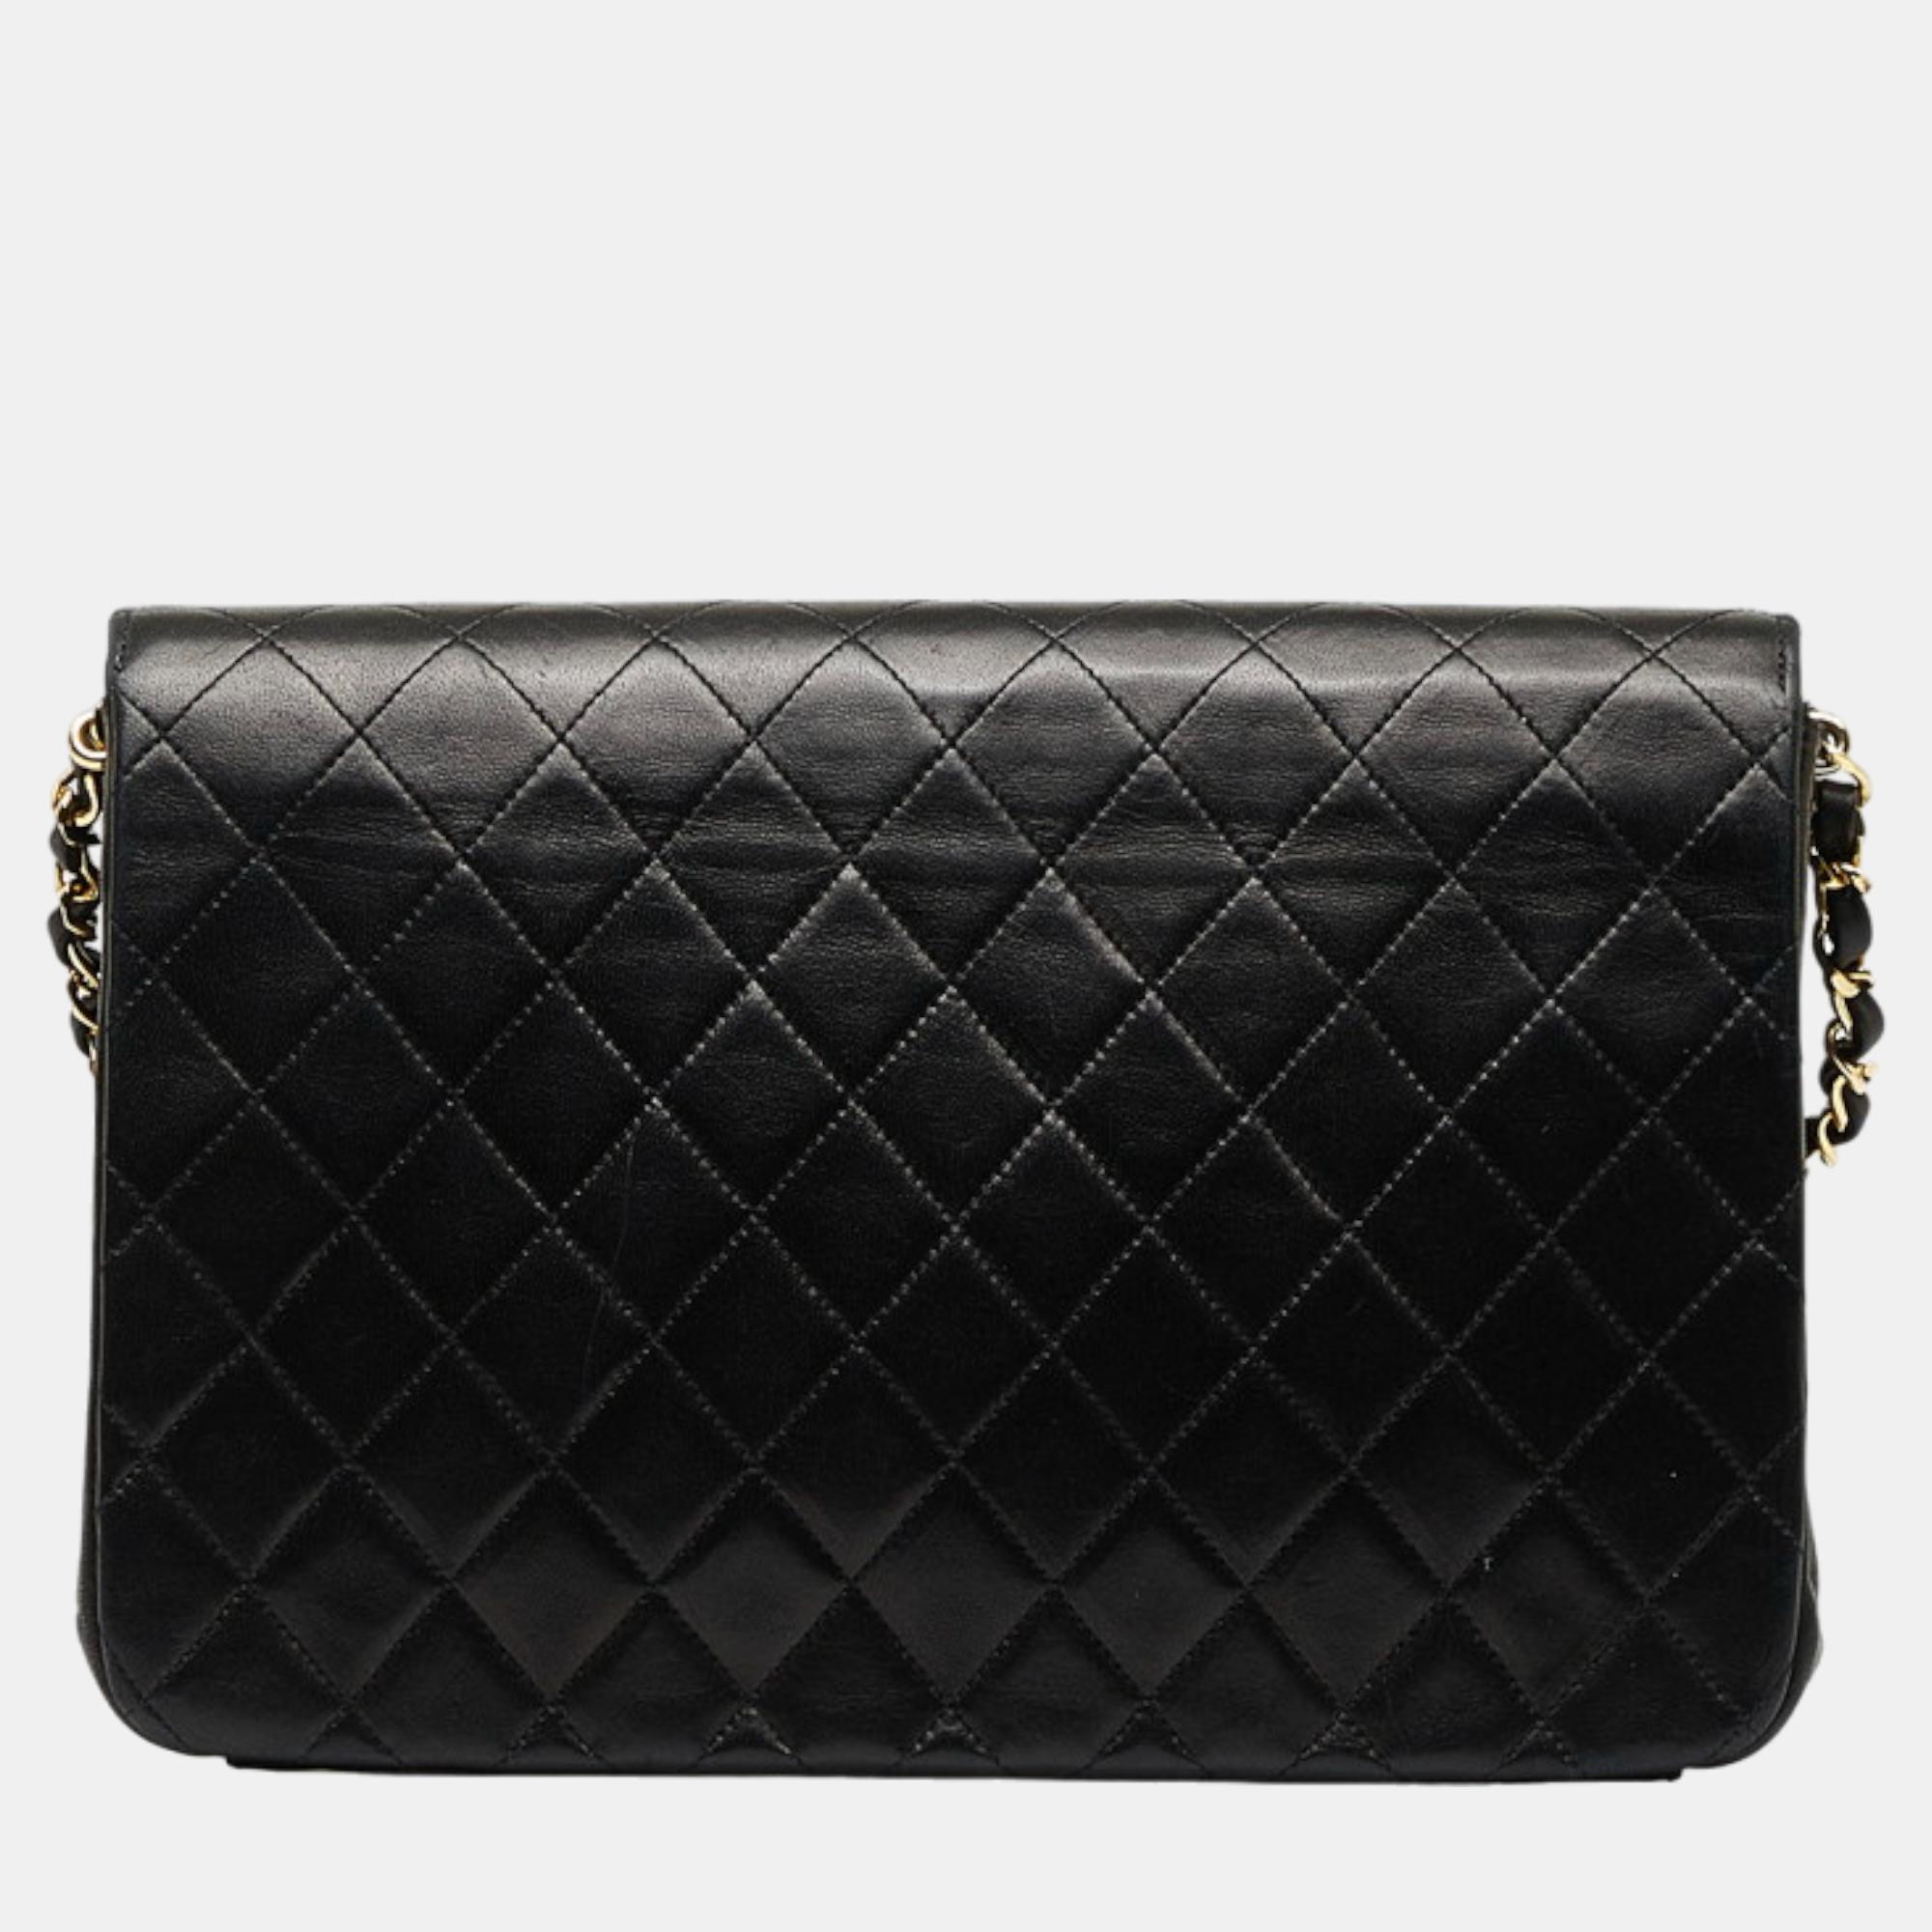 Chanel Black Leather CC Quilted Leather Flap Bag